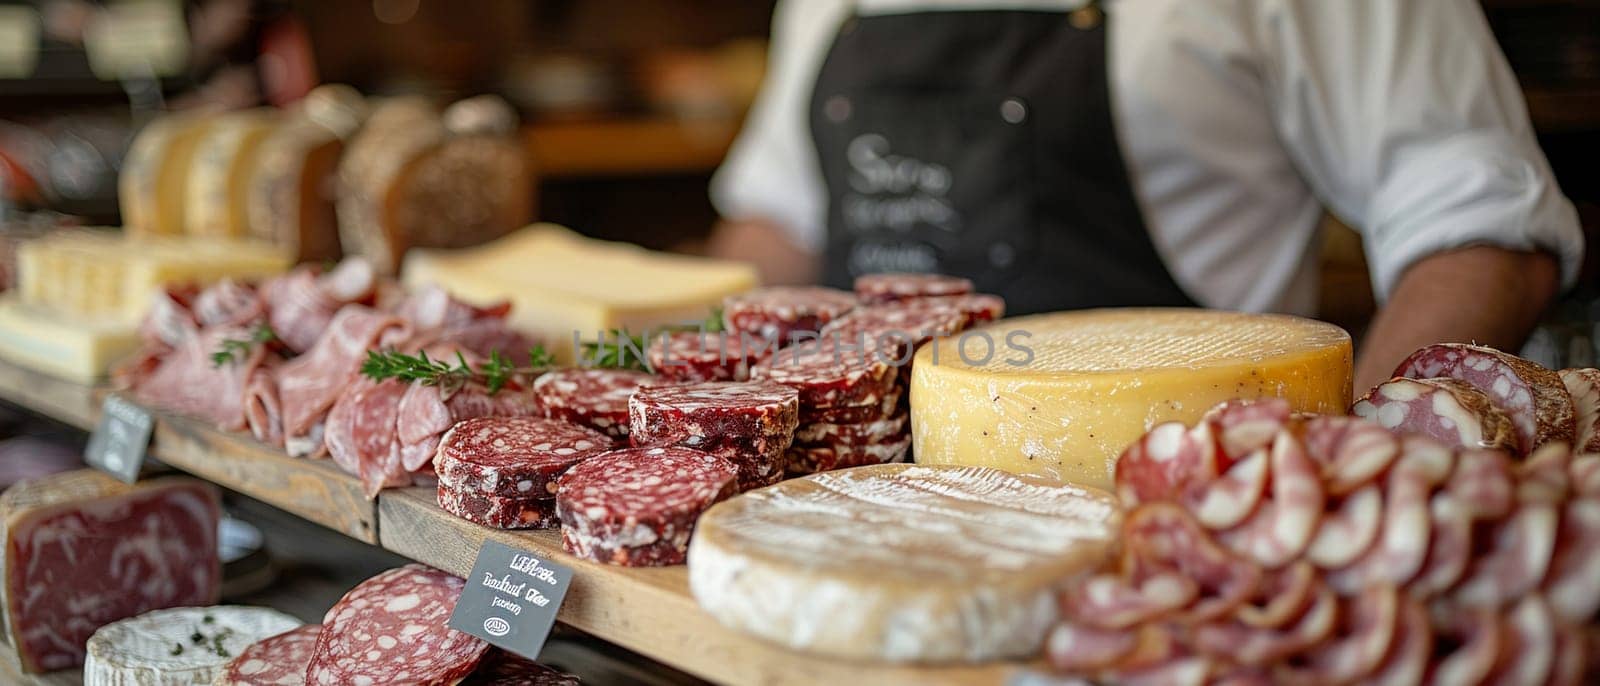 European Delicatessen Serves Tradition in Business of Imported Gourmet Specialties, Cheese wheels and cured meats serve tradition and imported gourmet specialties in the European delicatessen business.